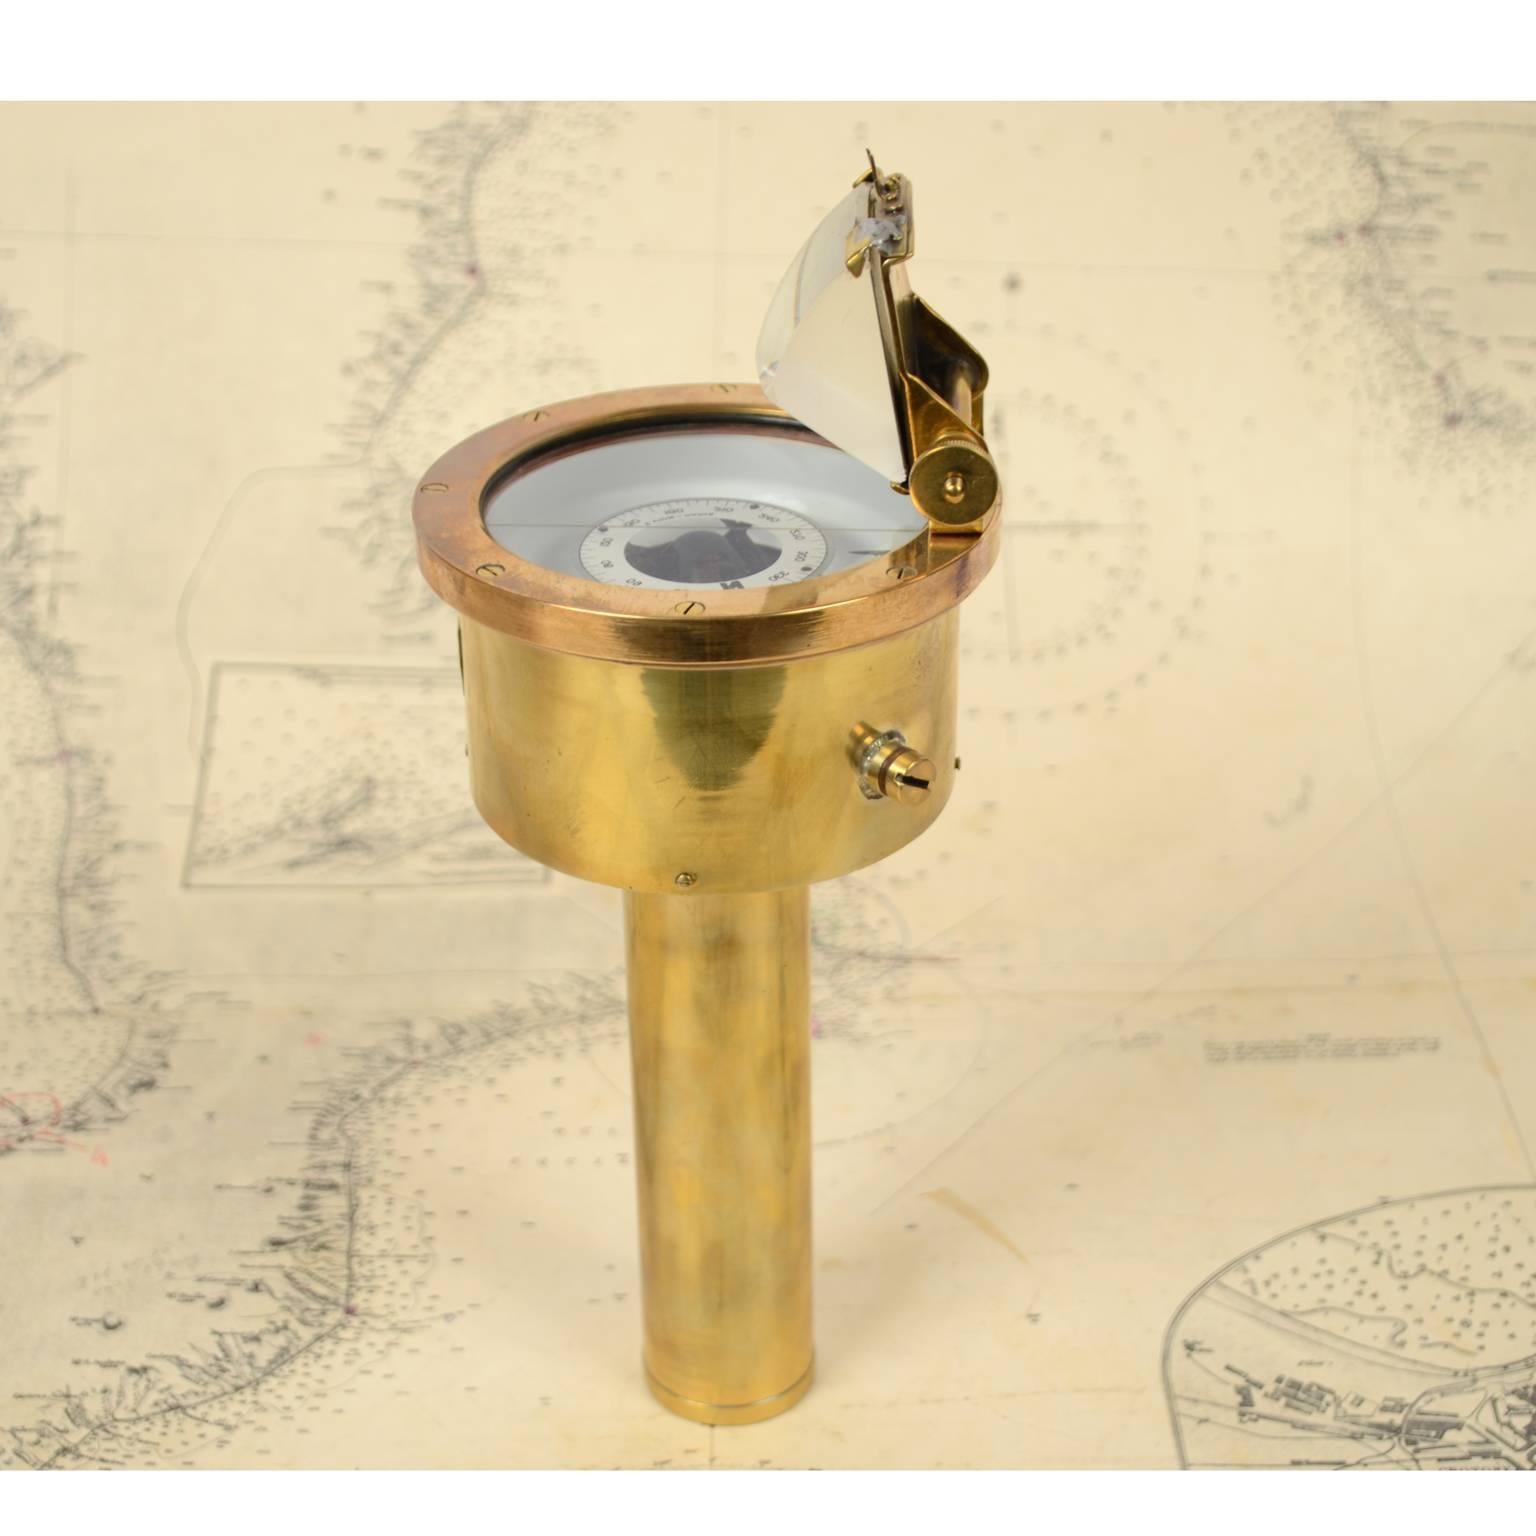 20th Century Nautical Brass Magnetic Compass with Original Box by E. Vion Paris, Early 1900 For Sale